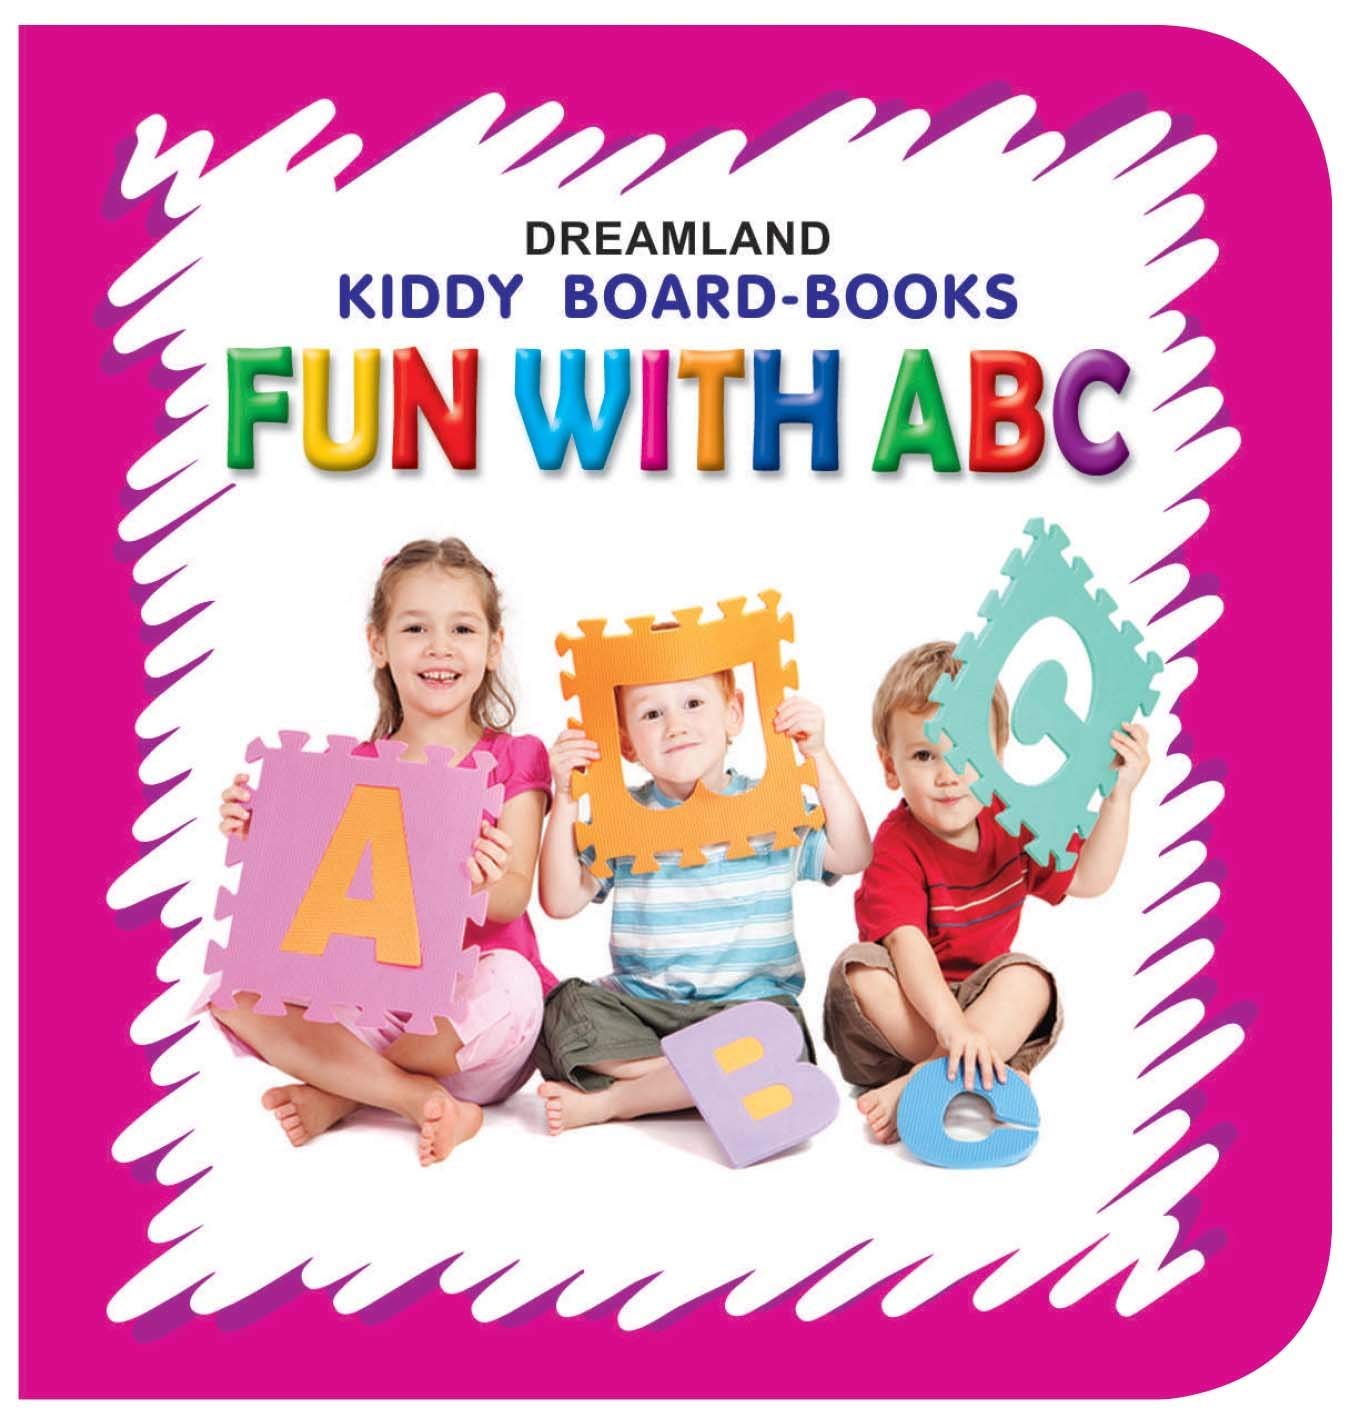 Fun With ABC Board Book for Children Age 0 -2 Years